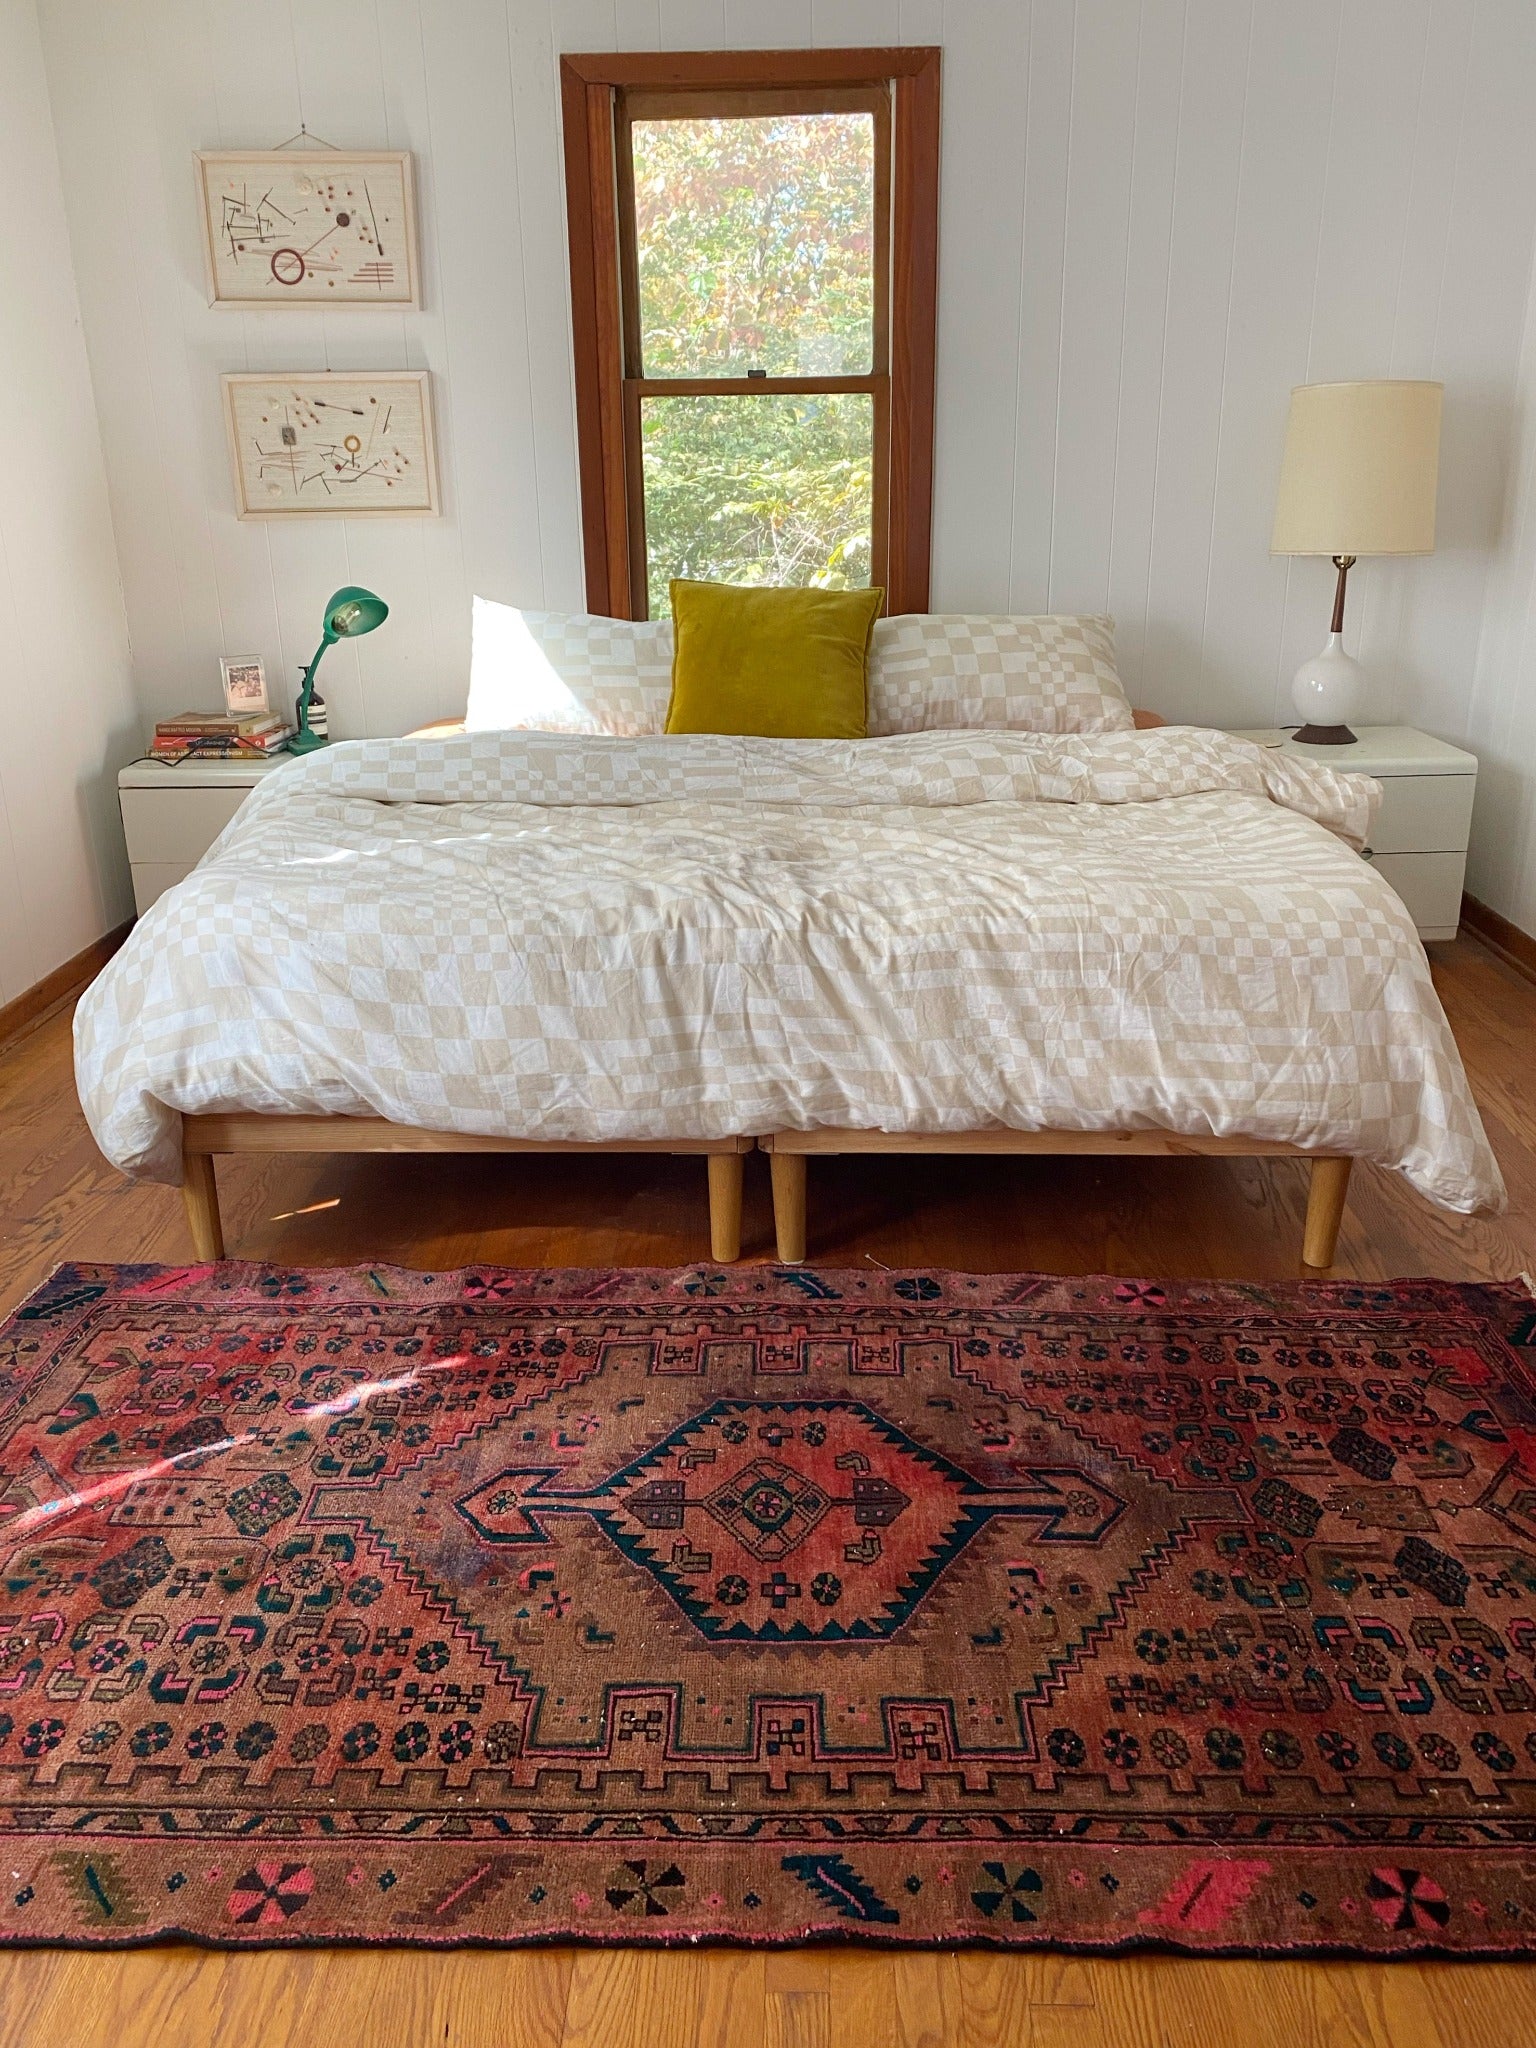 Style Palatka Persian Rug in a Bedroom